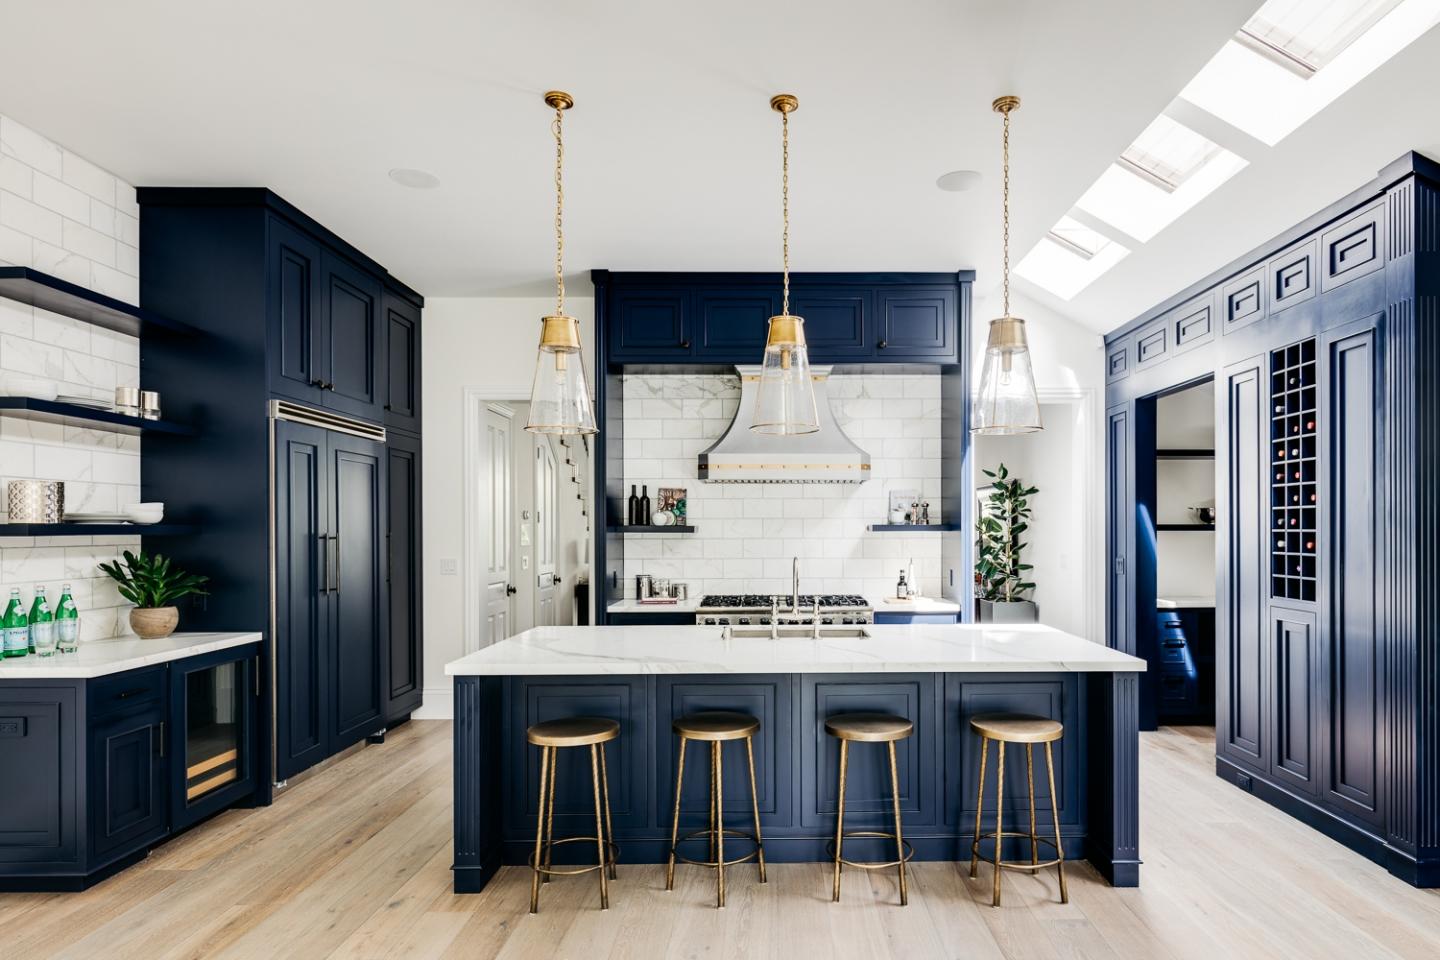 The kitchen was transformed with Calcutta Oro marble, Viking appliances, and deep blue and gold accents